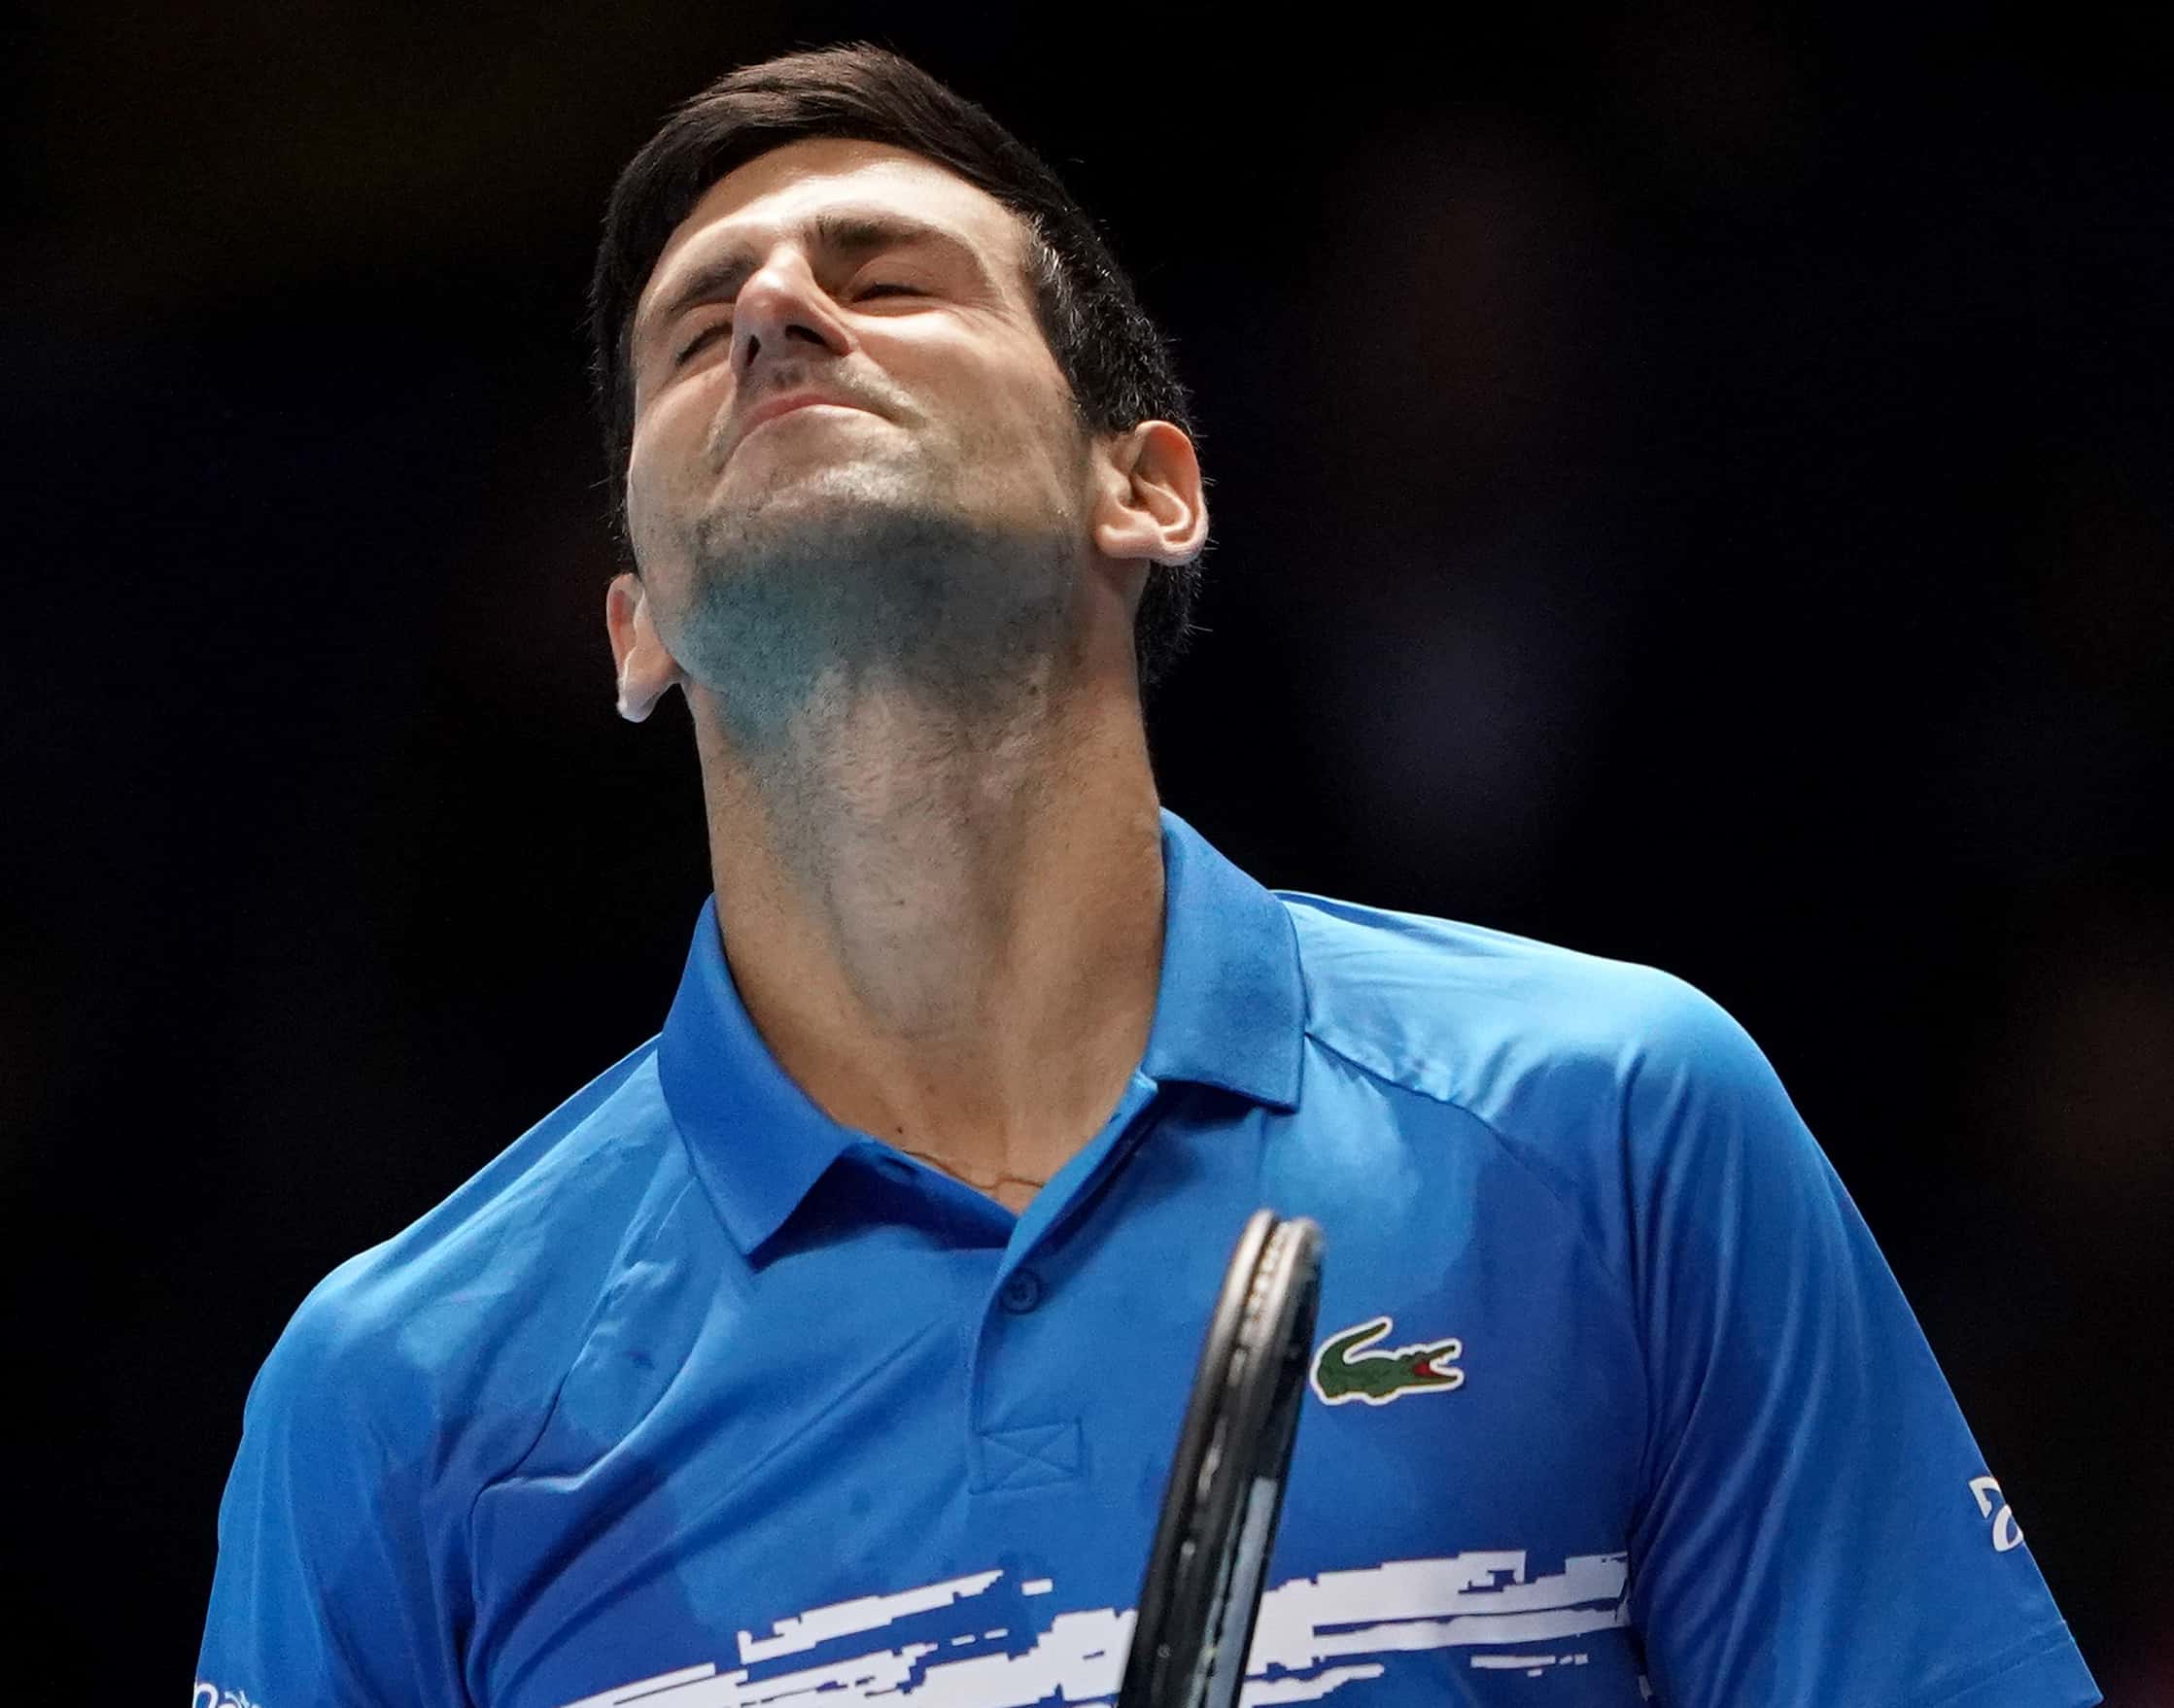 Novaxx' Djokovic gets meme treatment after being barred from Australia